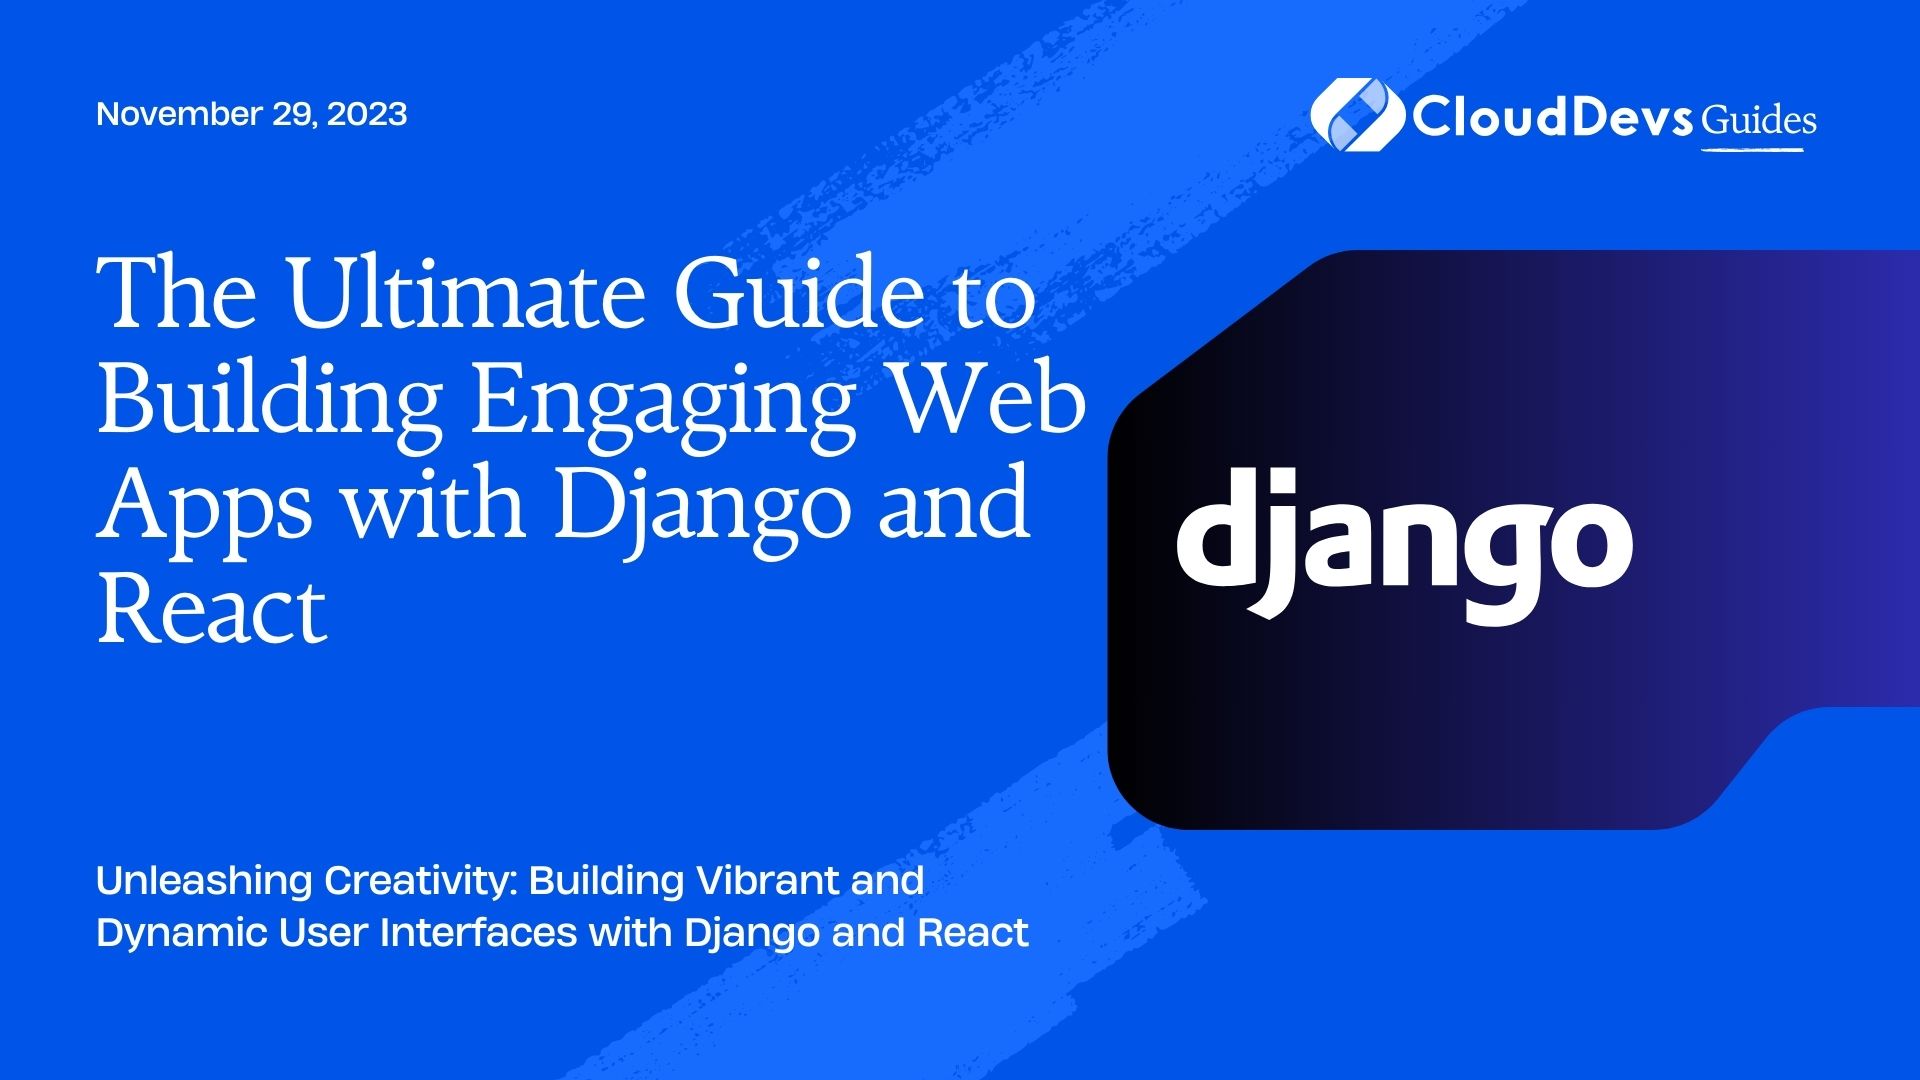 The Ultimate Guide to Building Engaging Web Apps with Django and React